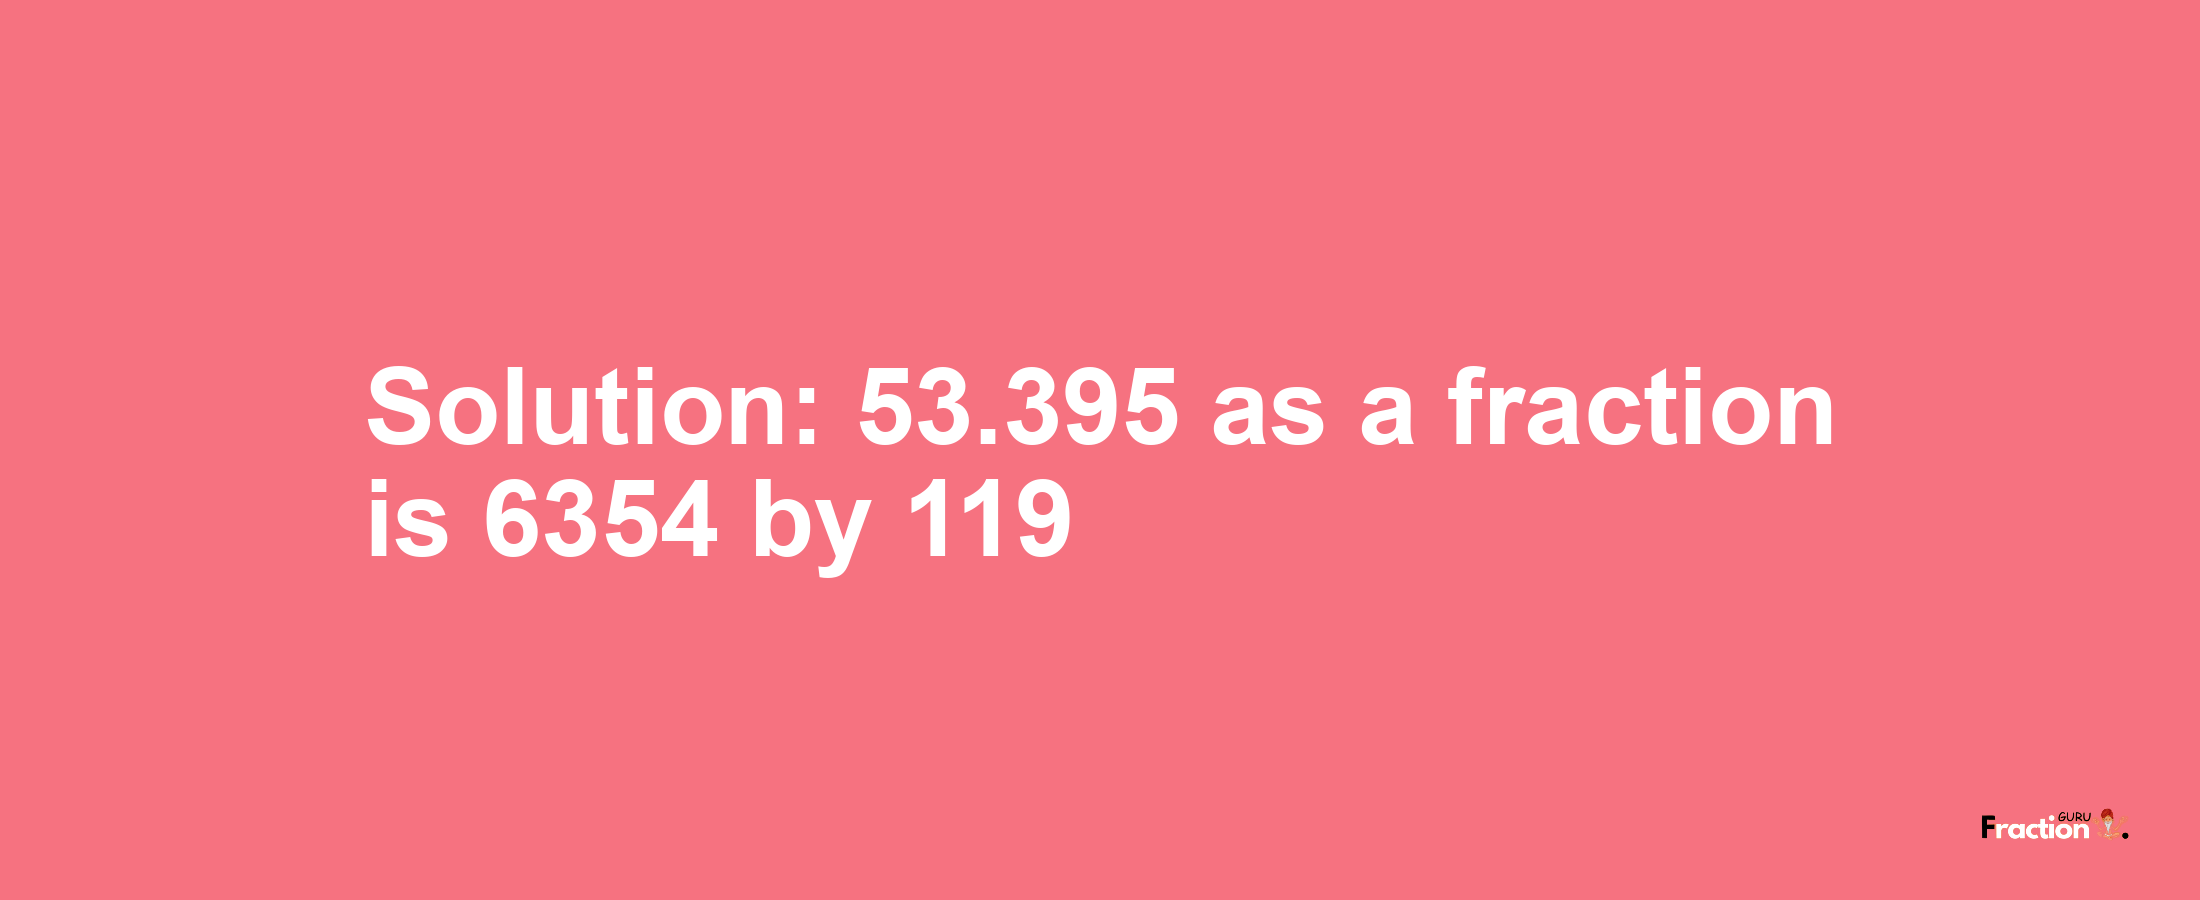 Solution:53.395 as a fraction is 6354/119